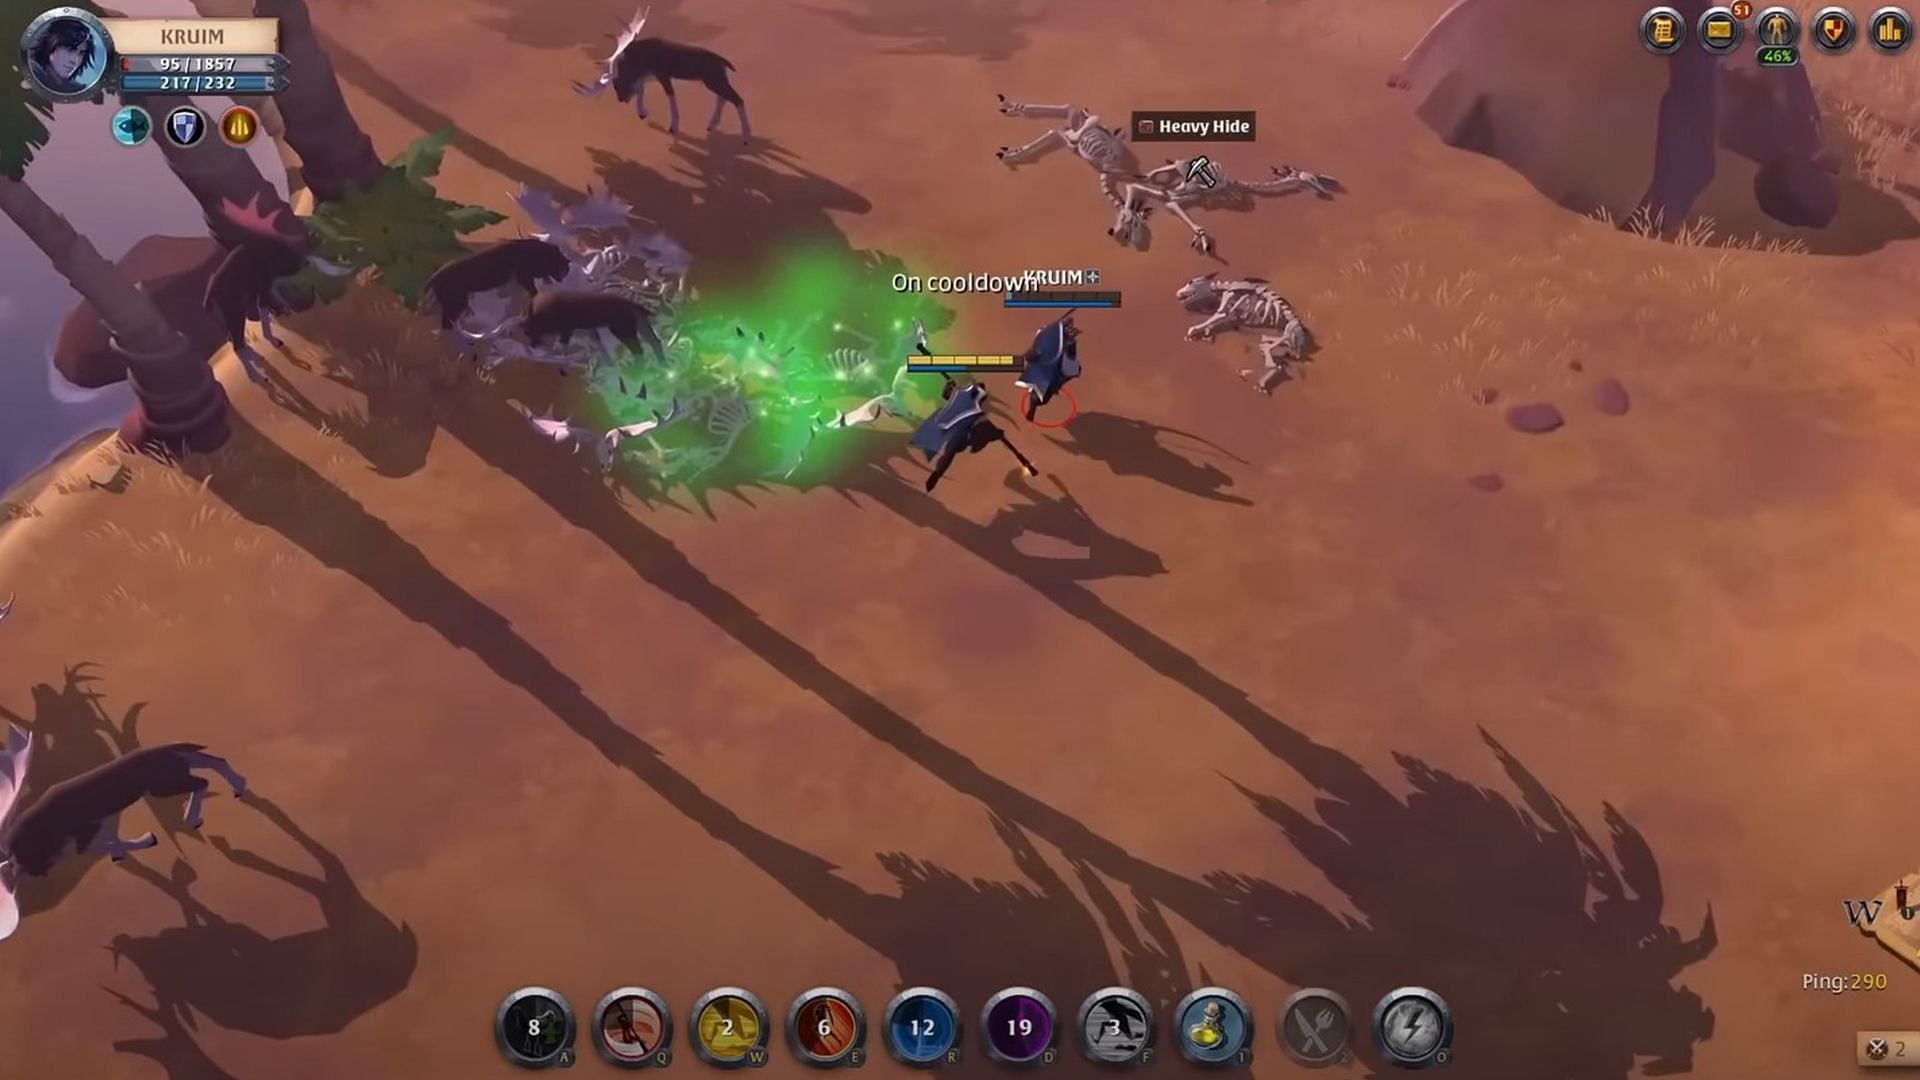 Albion Online Mobile 2023 F2P, Solo Dungeon Chief Blaster 